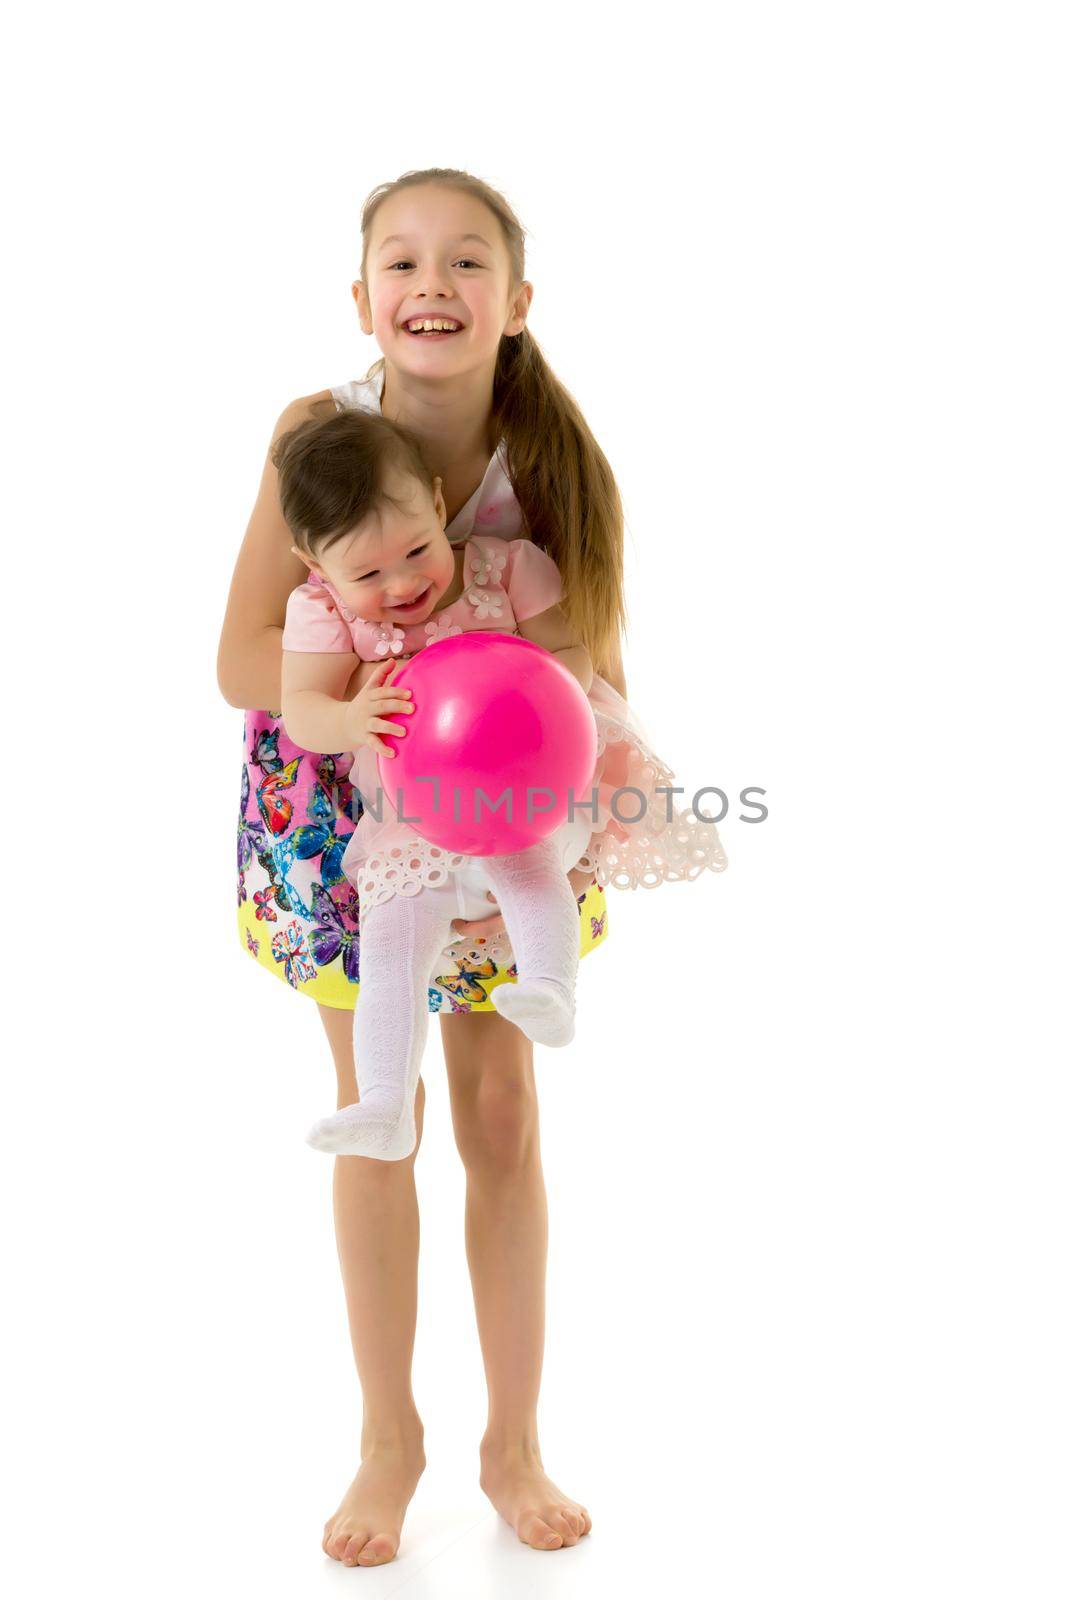 Cute Happy Girls Laughing and Playing Together with Pink Balloon, Teen Girl Holding Cute Toddler Sister on Her Hands, Two Adorable Happy Children Having Fun on Isolated on White Background